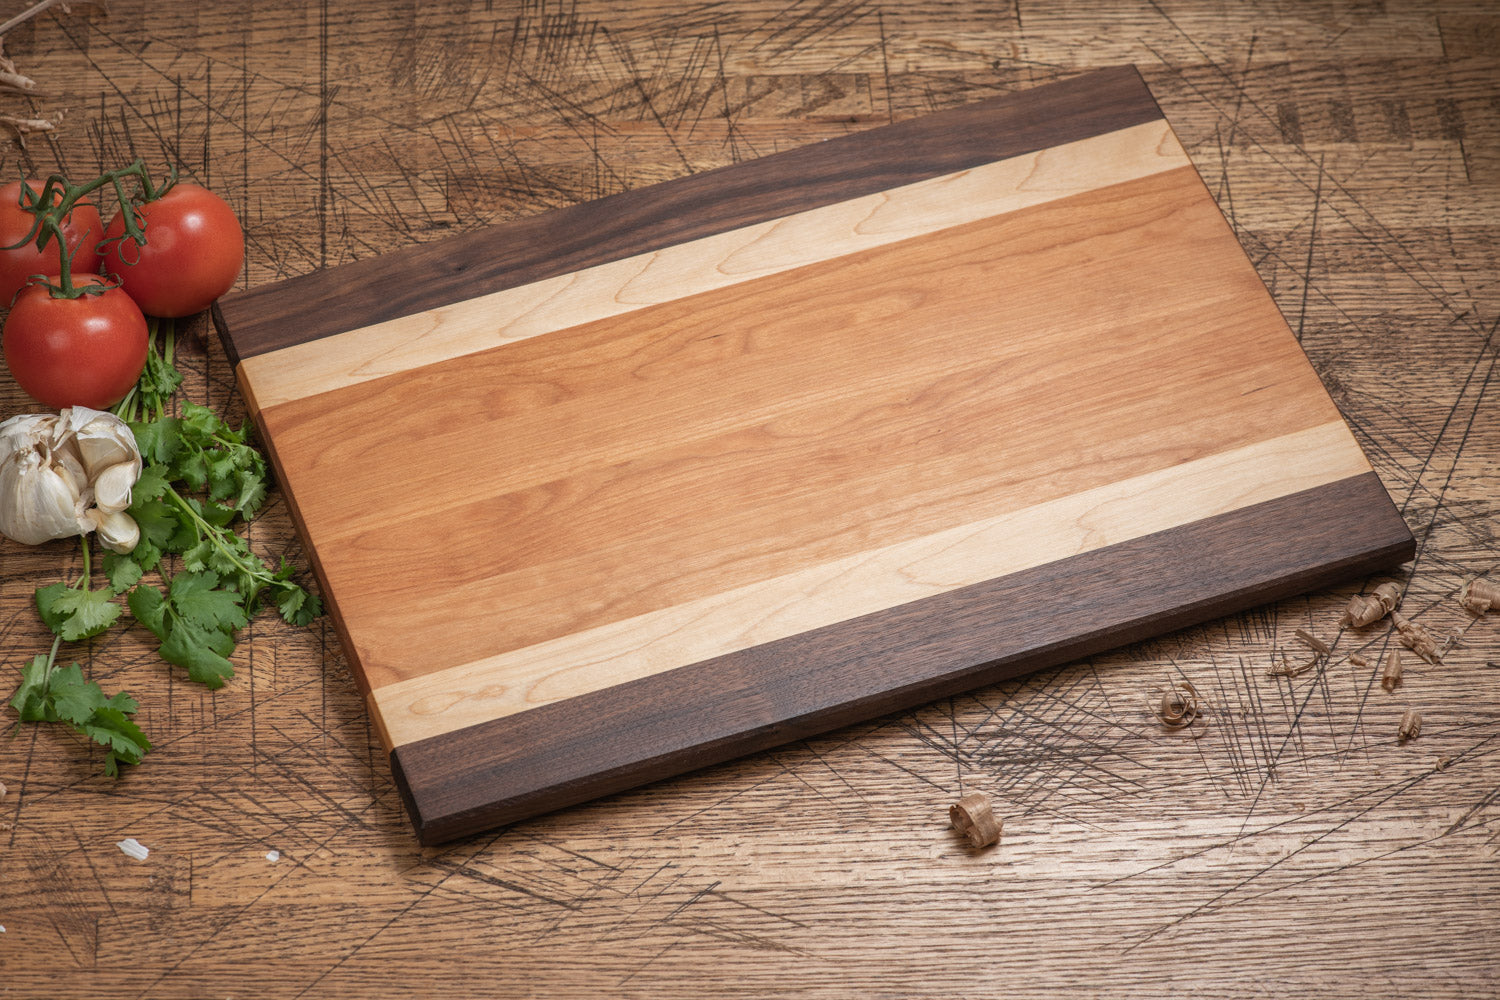 The Best Cutting Board Is One That Combines the Best Features of Wood and  Plastic Cutting Boards